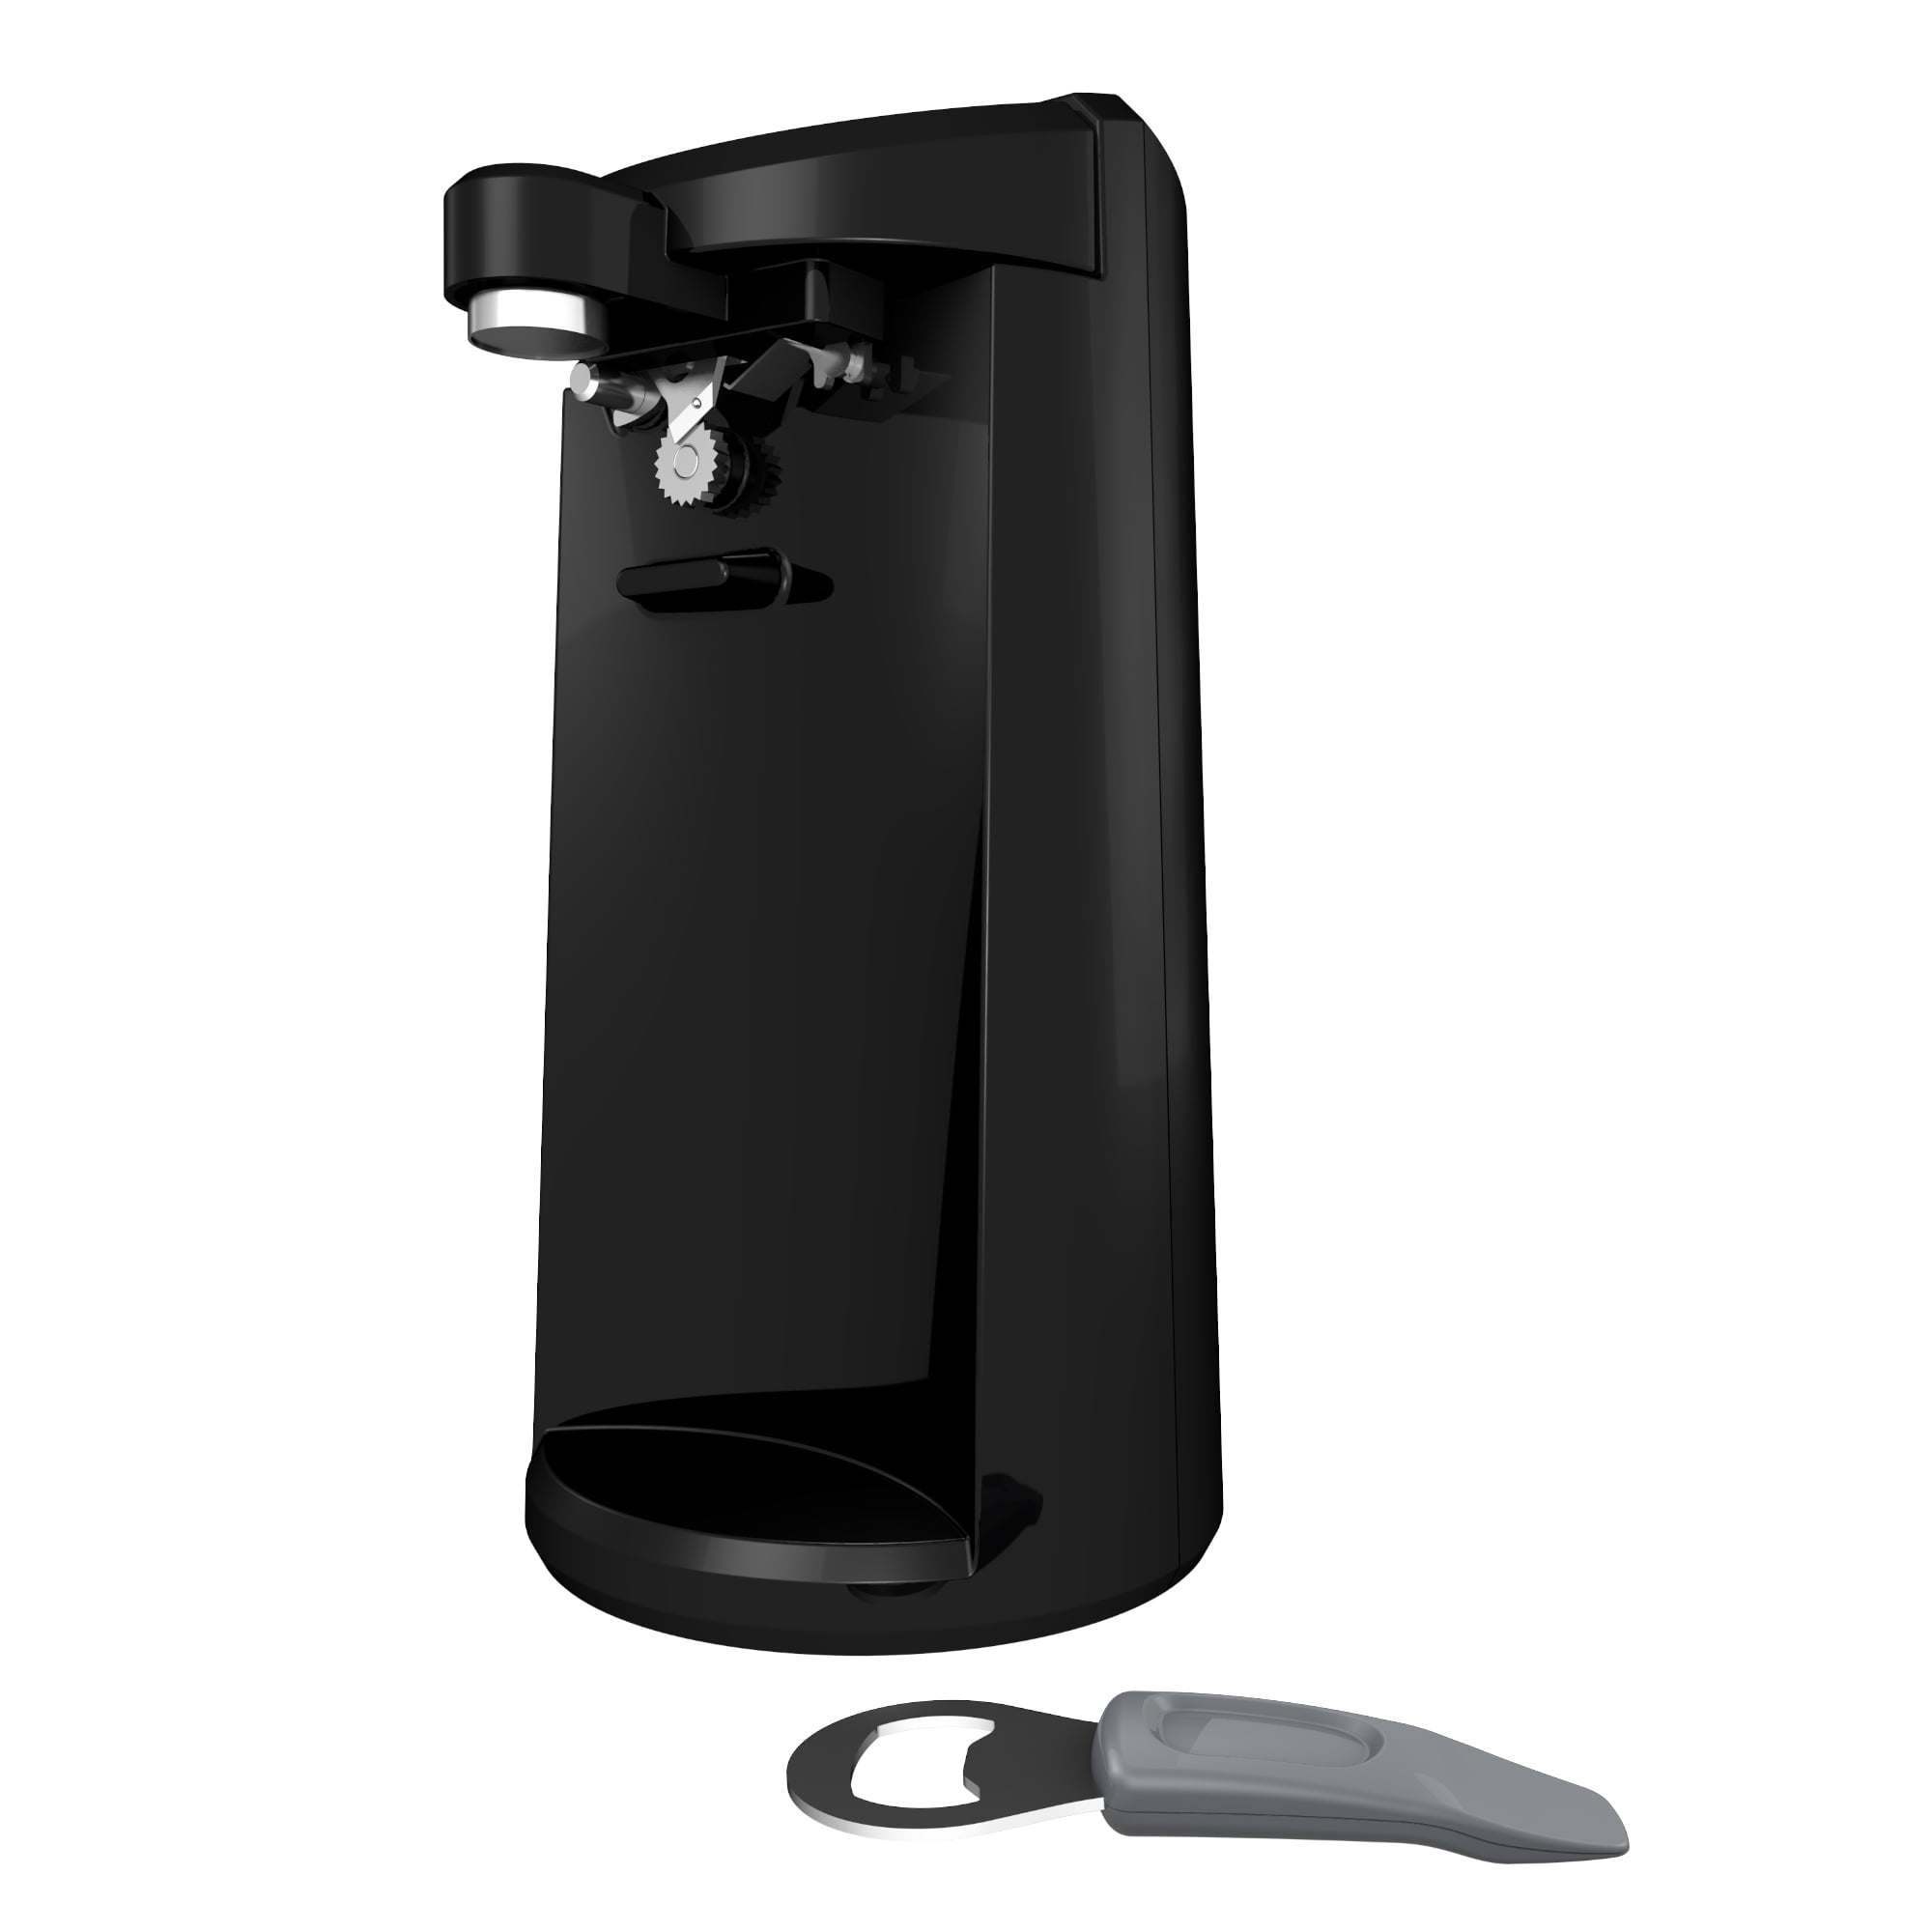 Kitchen Mama One-To-Go Electric Can Opener: Open Cans with One Press- Auto  Detect Any Can Shapes, Auto-Stop As Task Completes, Smotth Edge, Handy with